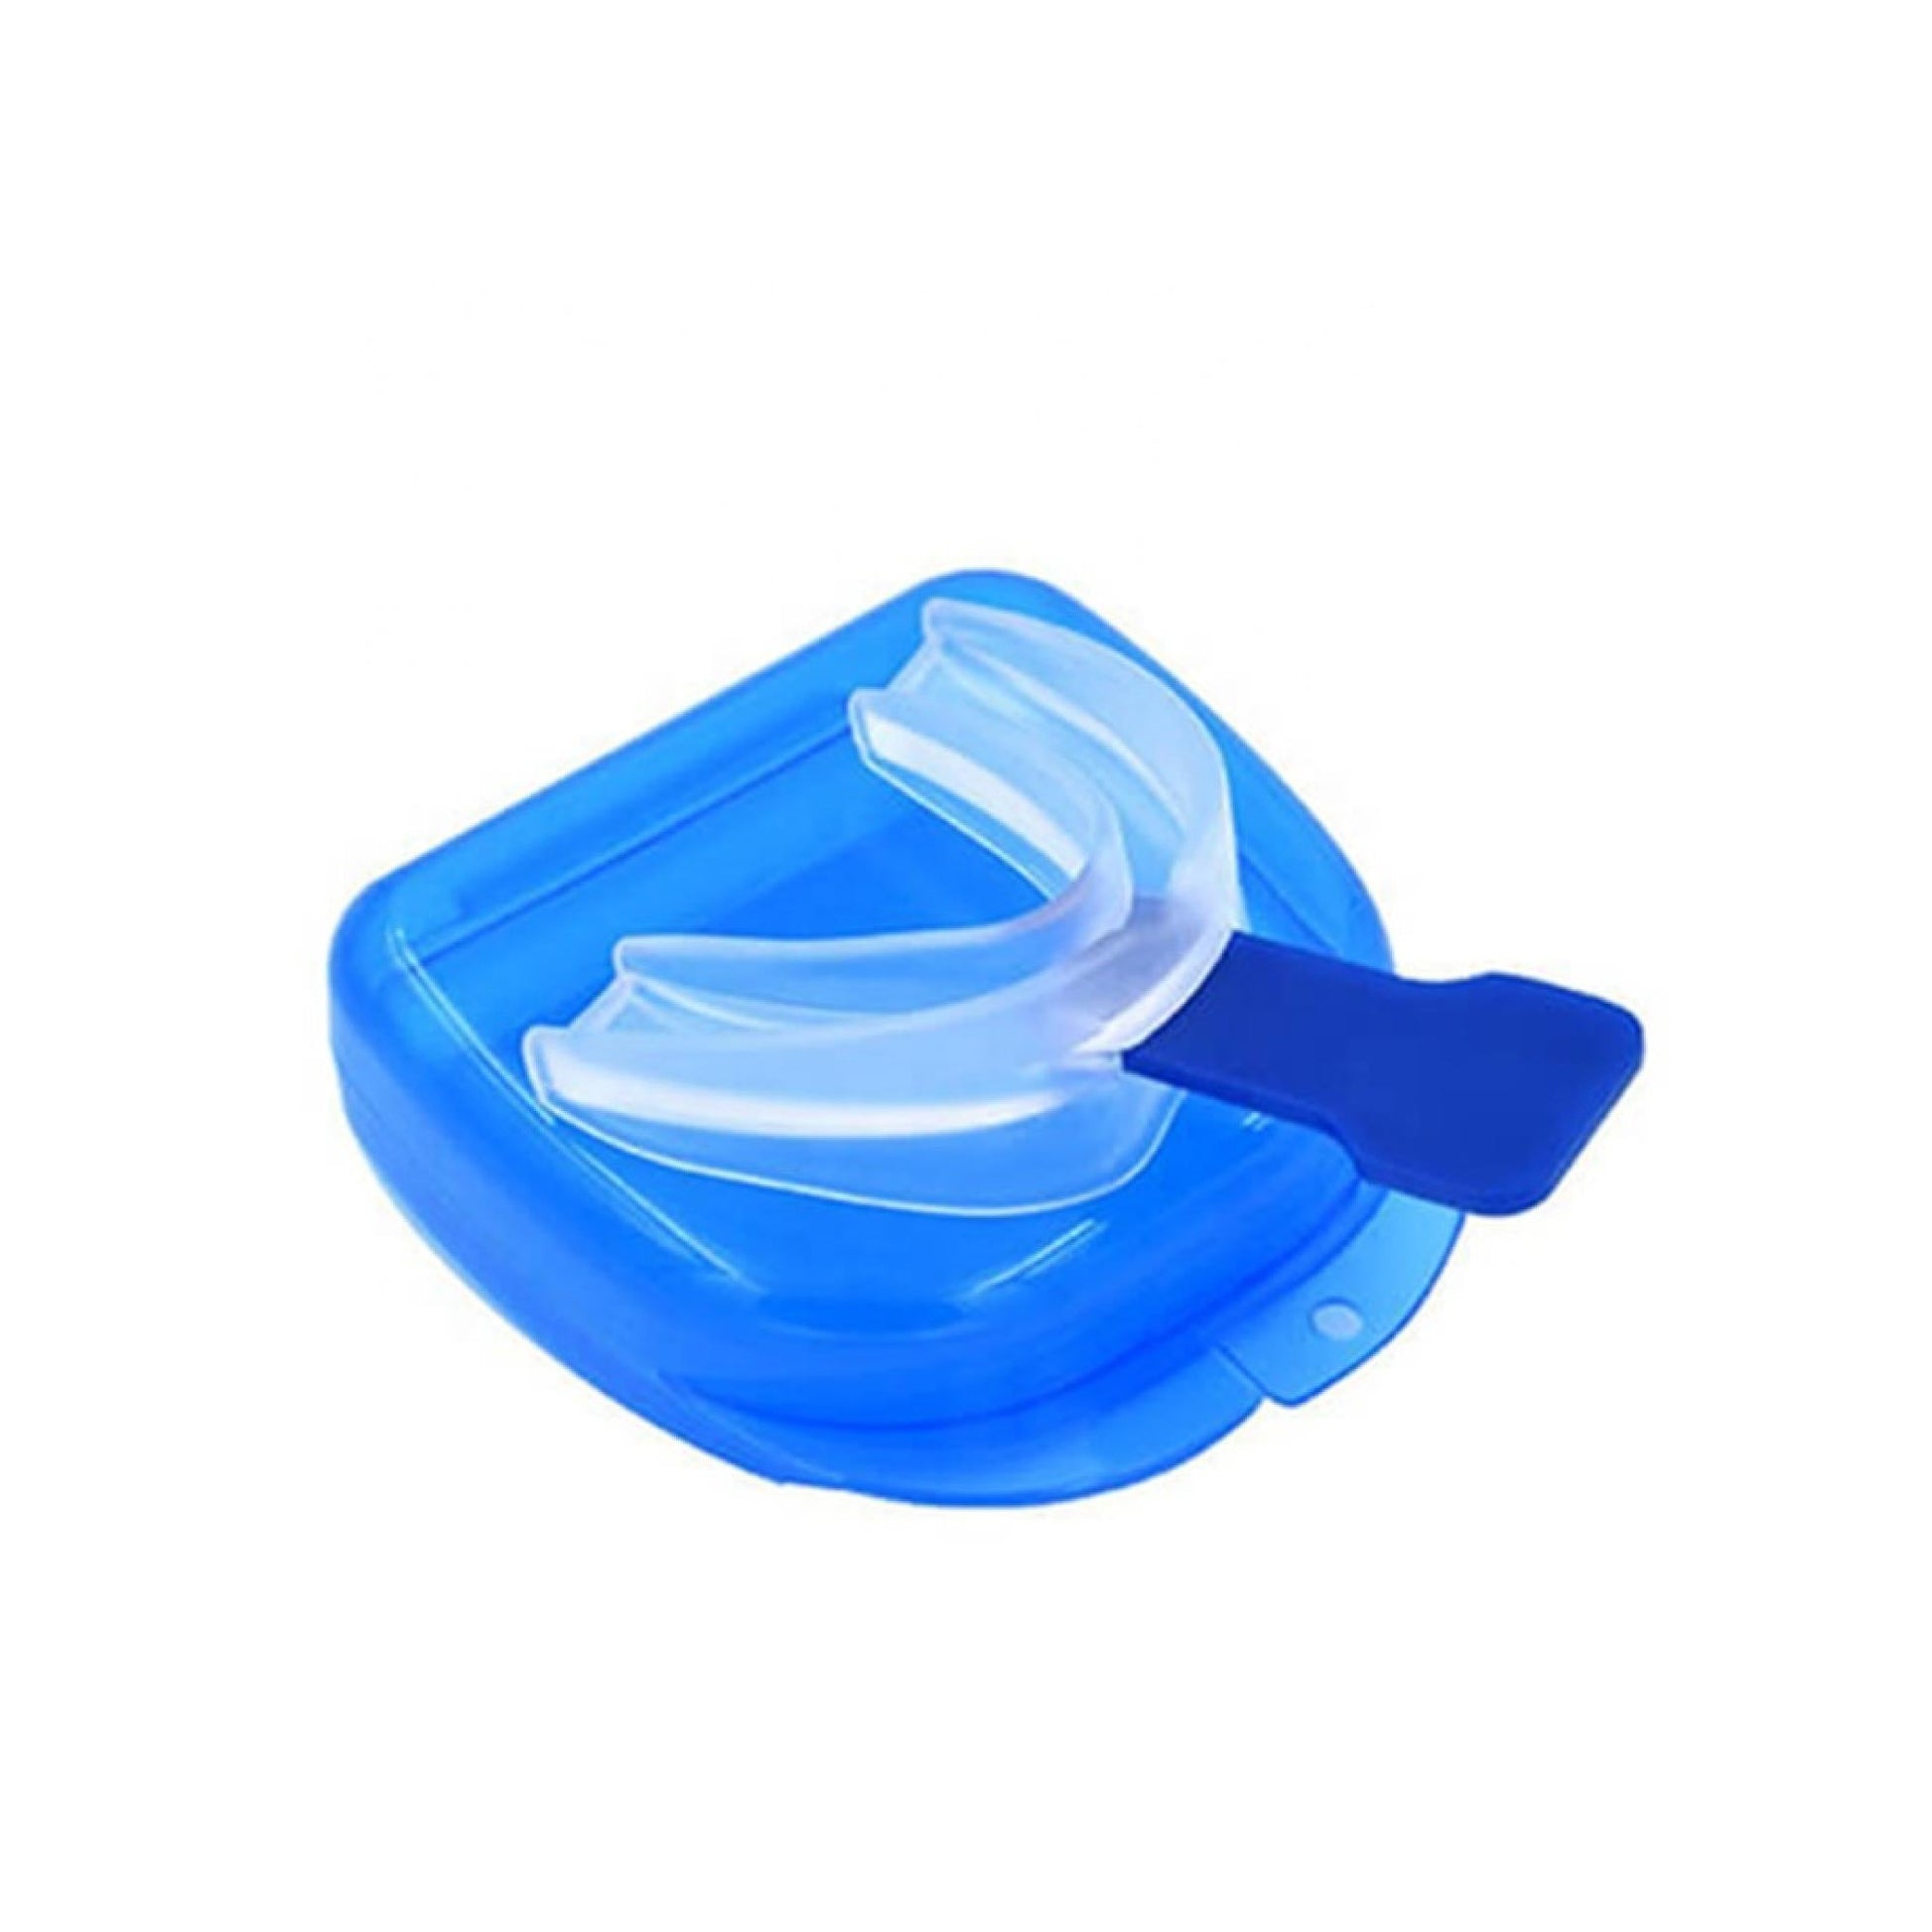 Anti Snoring Aid Mouth Guard - Adjustable Sleeping and Breathing Mouthguard